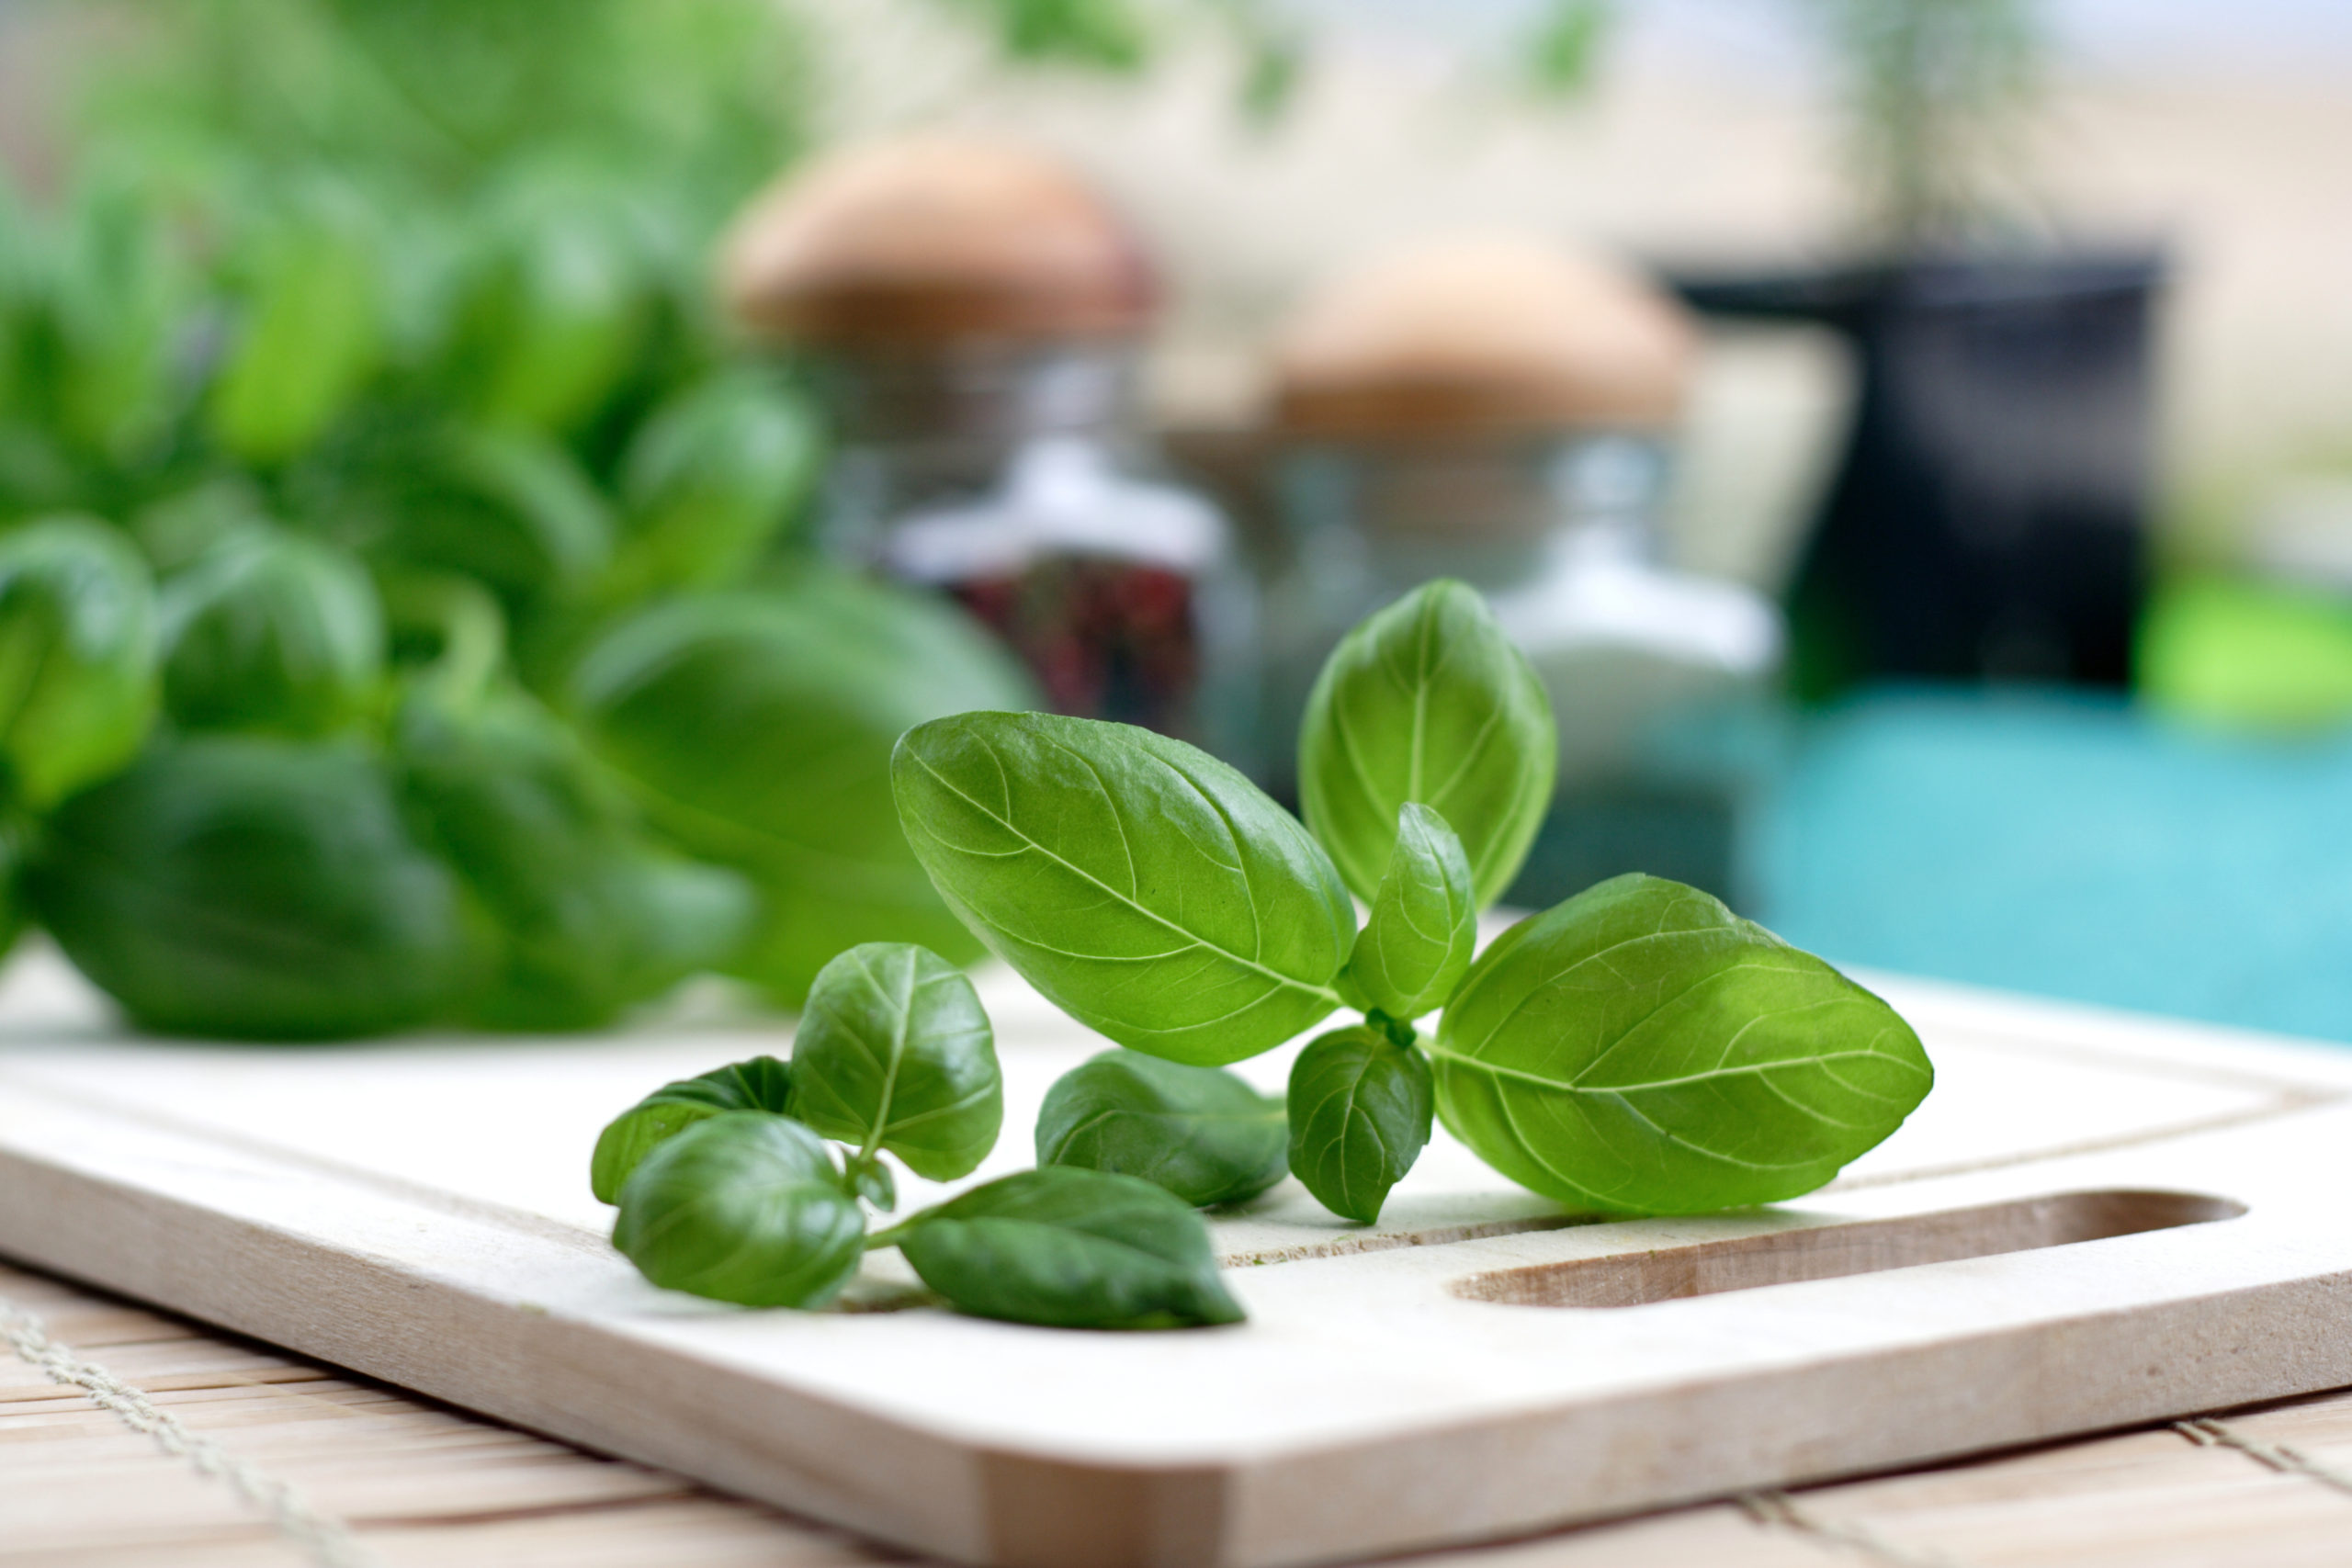 Basil for cooking